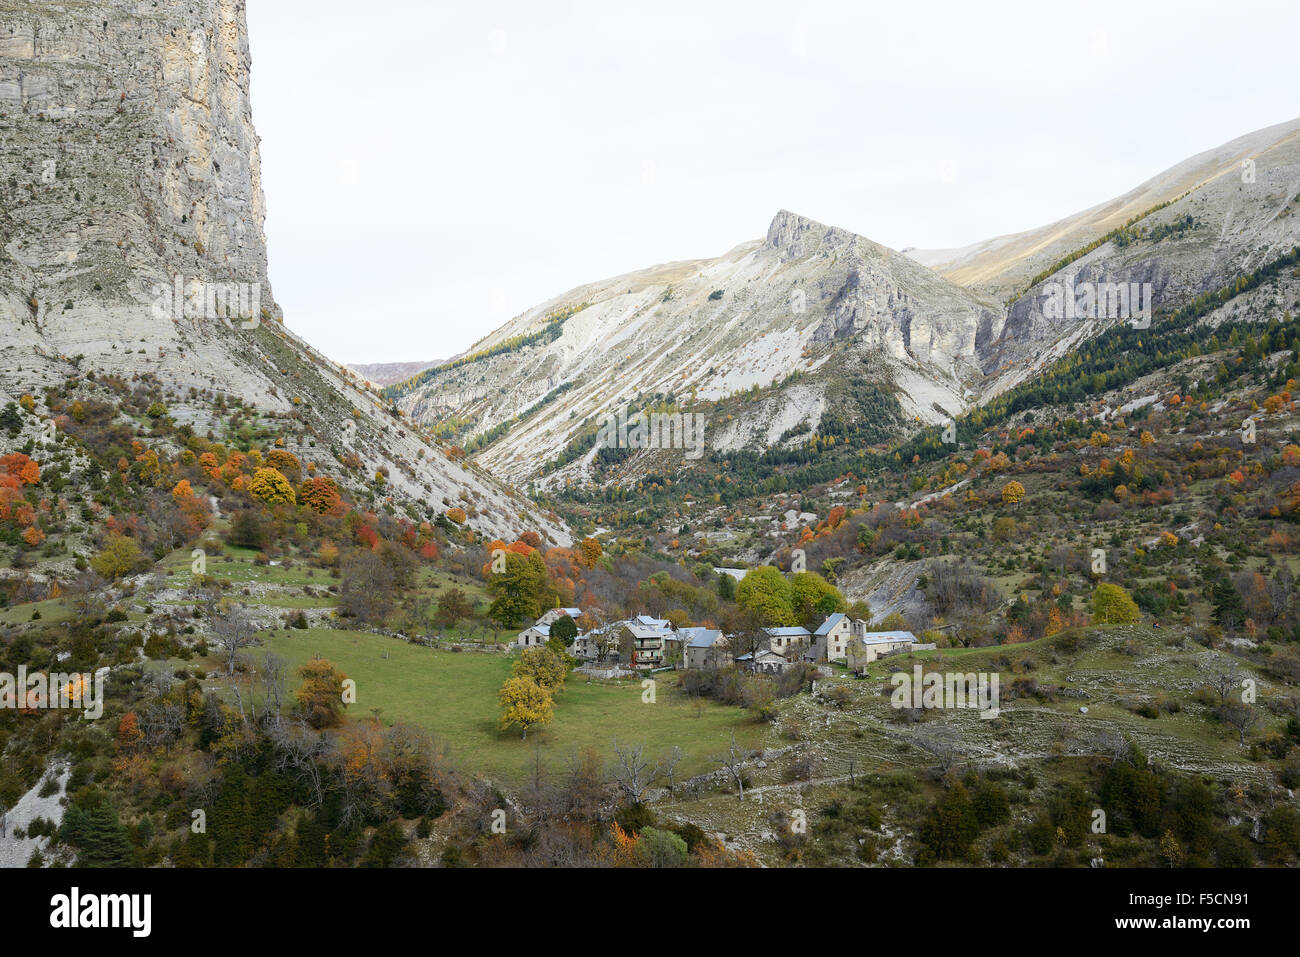 Abandoned hamlet in a remote alpine valley at the foot of a massive cliff. Aurent, Coulomp Valley, Alpes de Haute-Provence, France. Stock Photo